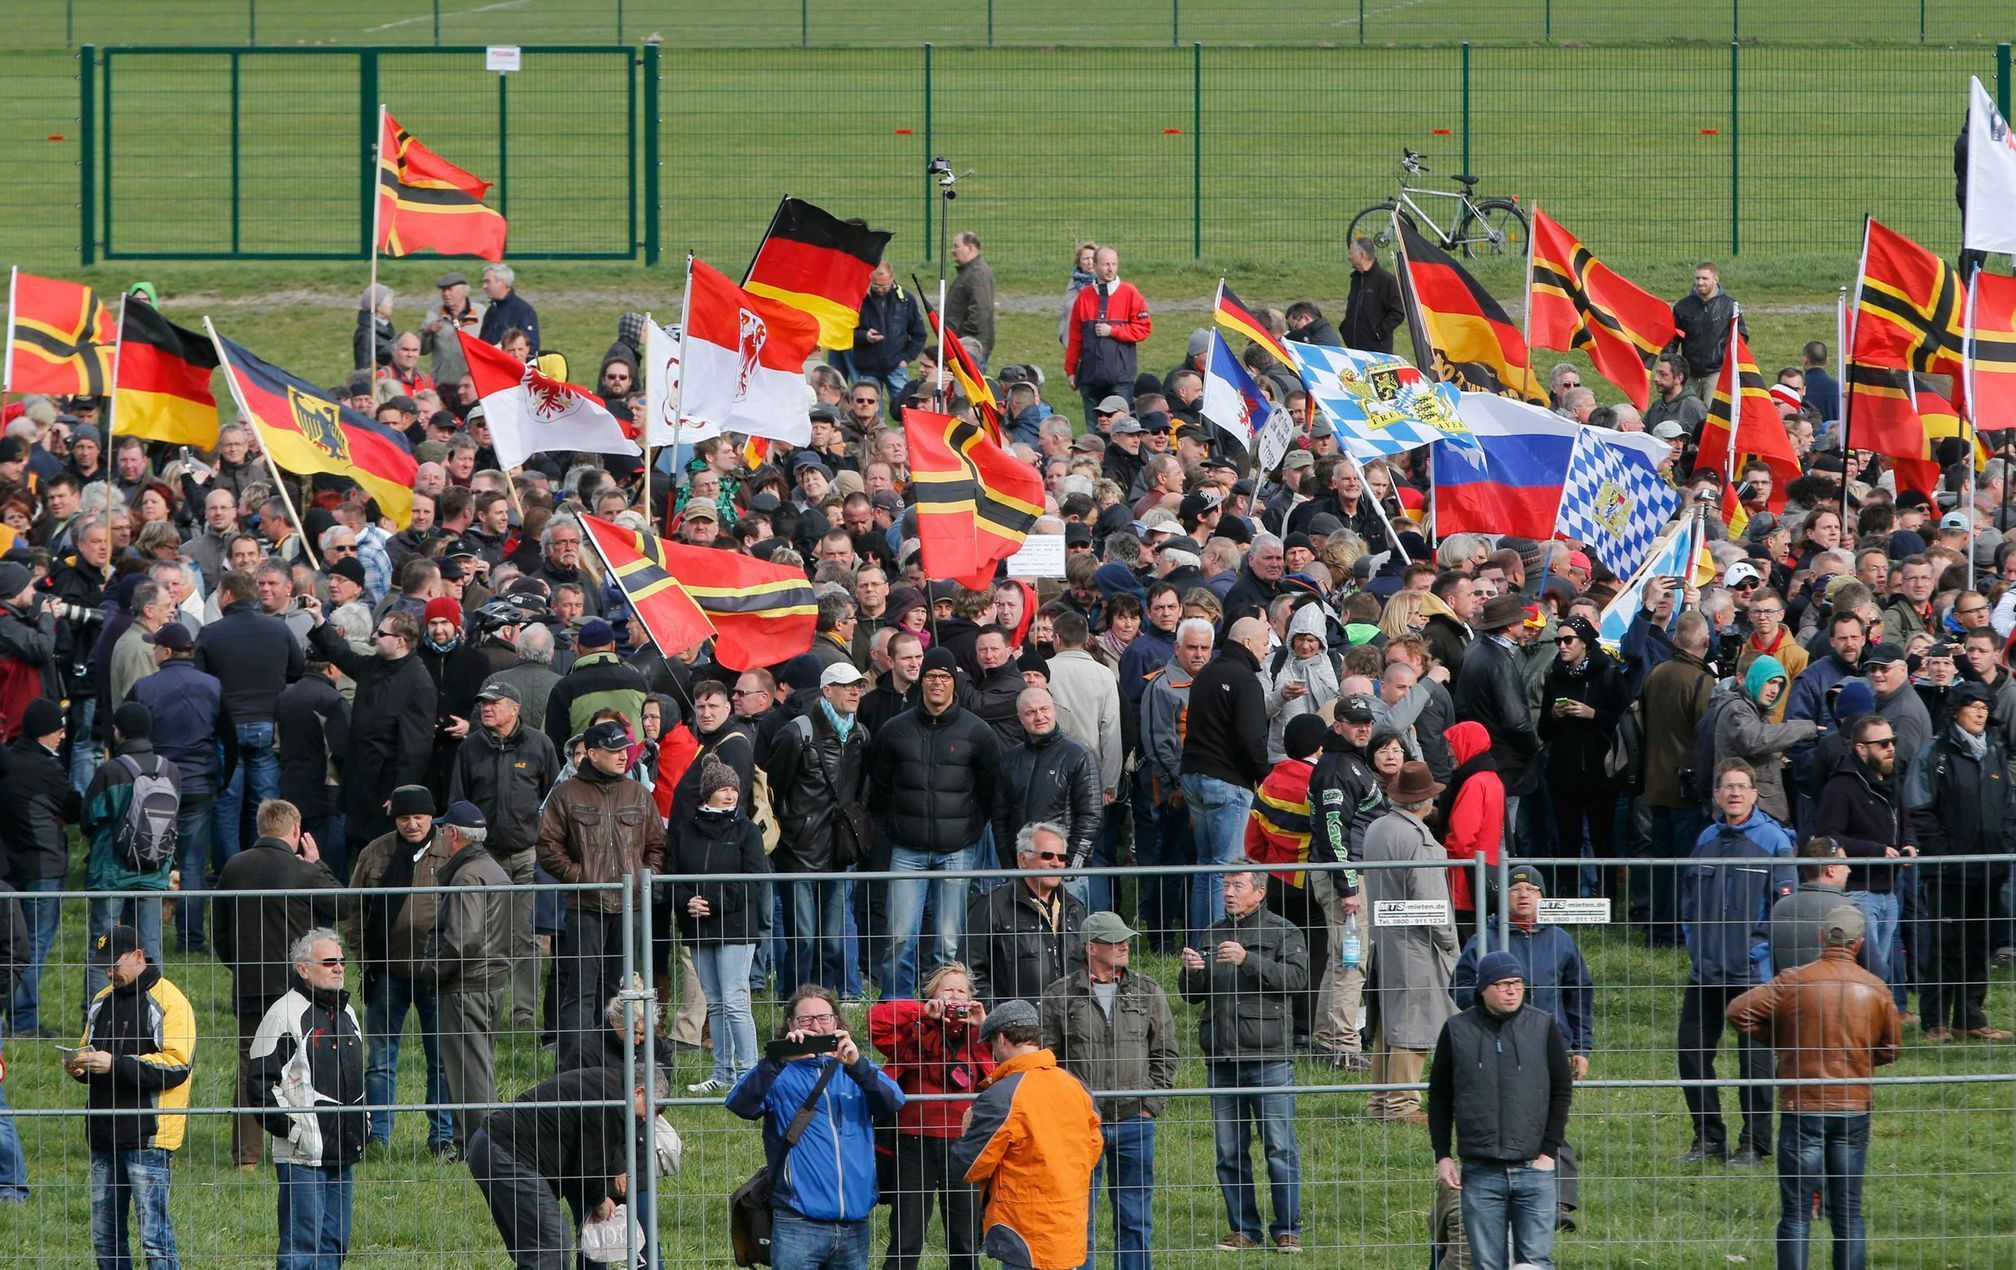 Supporters of the movement PEGIDA gather for a speech of Dutch anti-Islam politician Wilders during a rally in Dresden